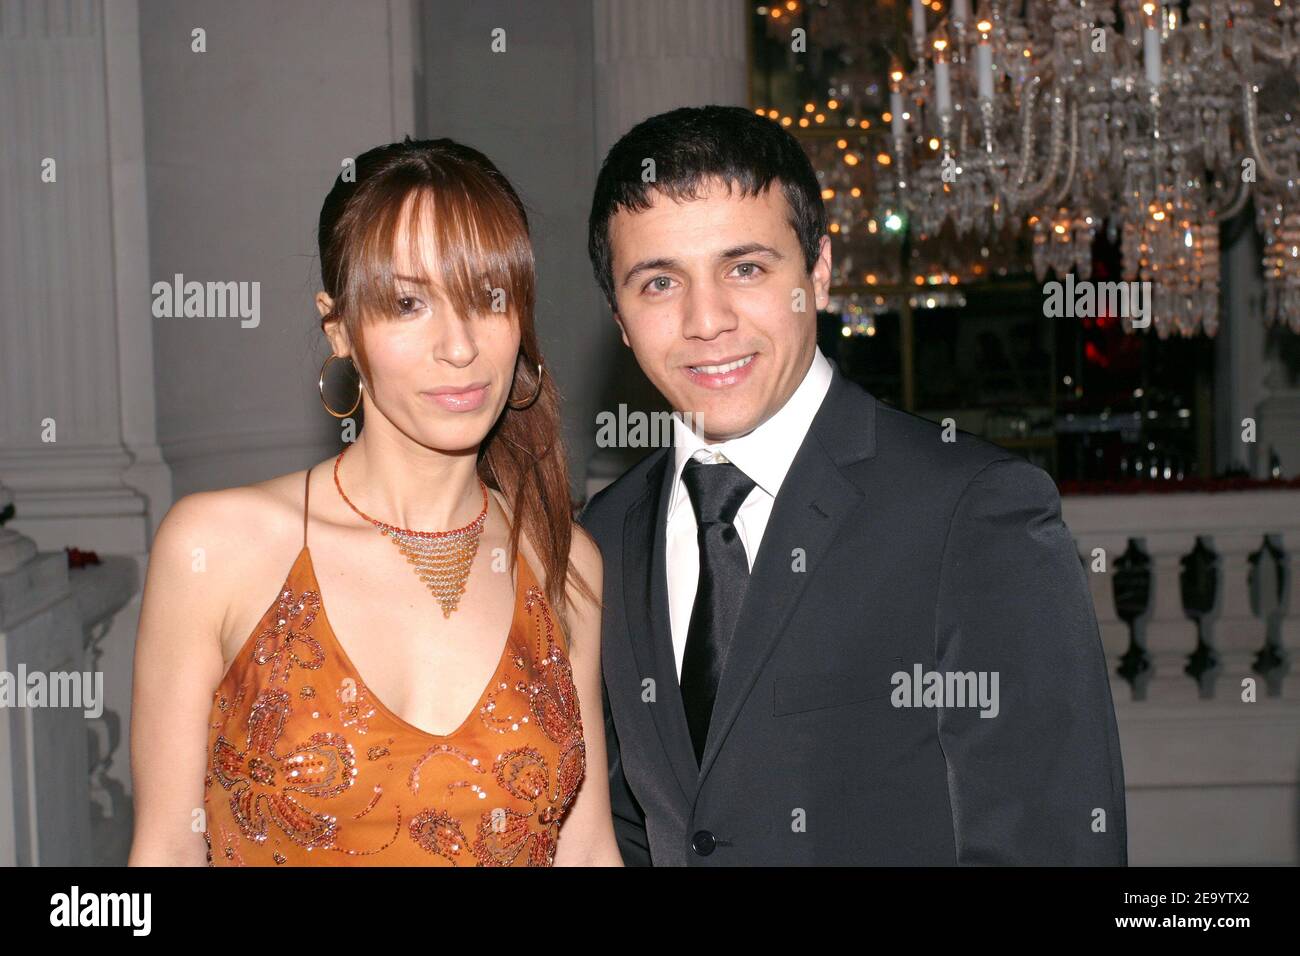 Algerian born rai singer Faudel and his wife Anissa arrive at the Haute-Couture Ball organized by Lebanese fashion designer Elie Saab at La Maison Baccarat in Paris, France, on January 24, 2005. Photo by Benoit Pinguet/ABACA. Stock Photo